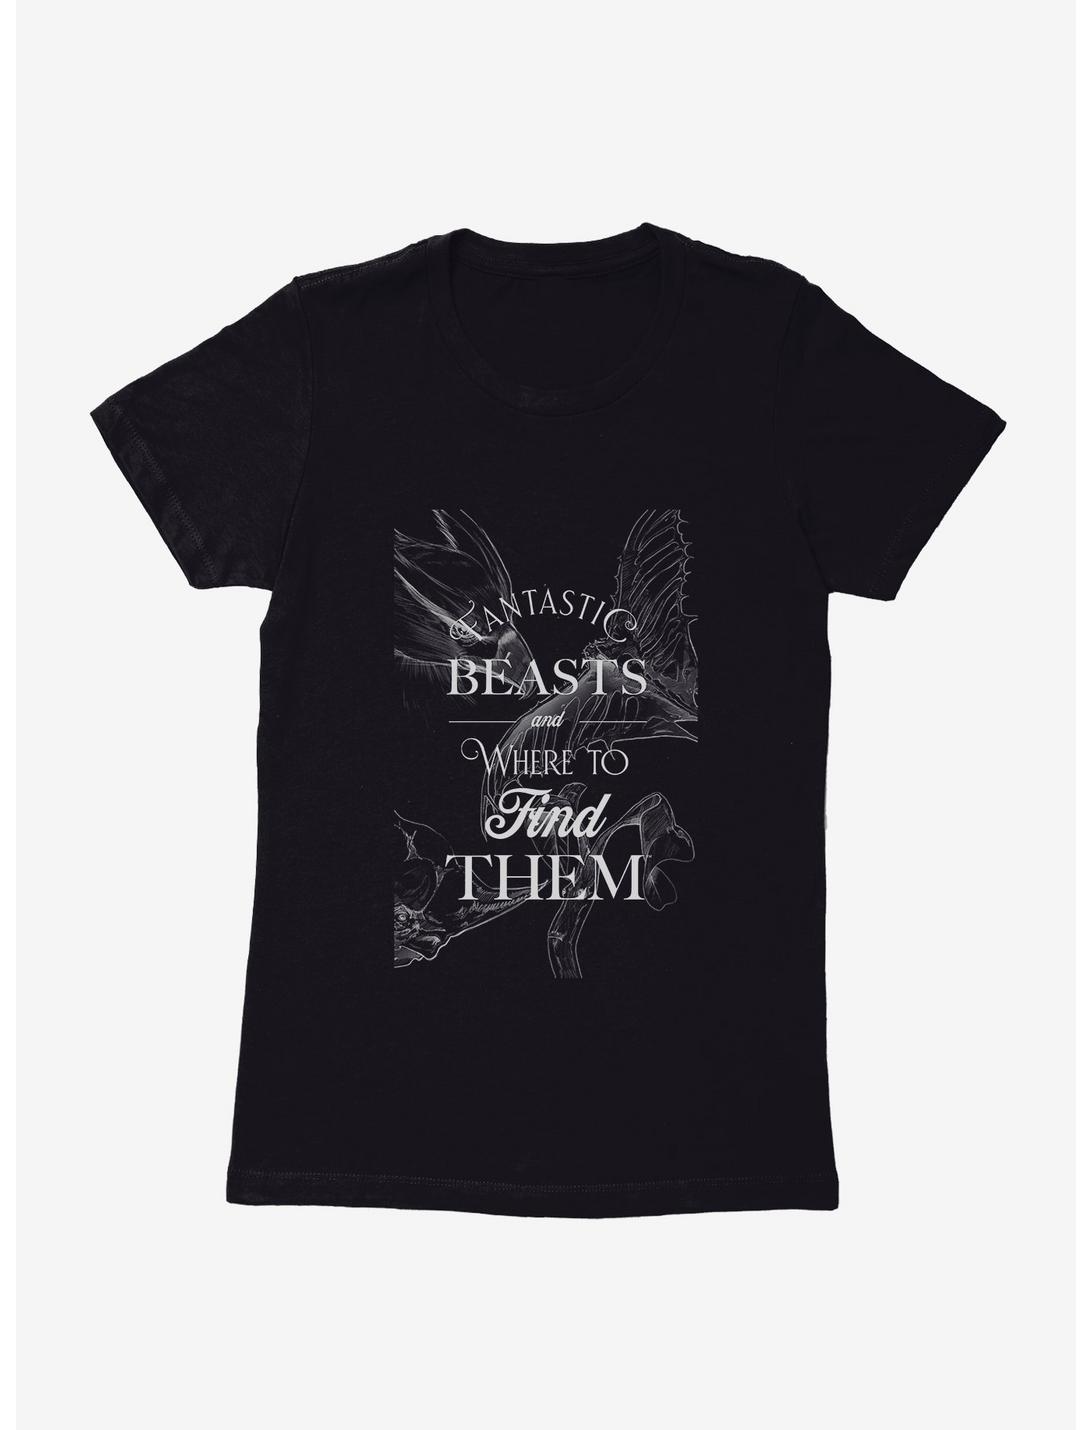 Fantastic Beasts And Where To Find Them Womens T-Shirt, , hi-res